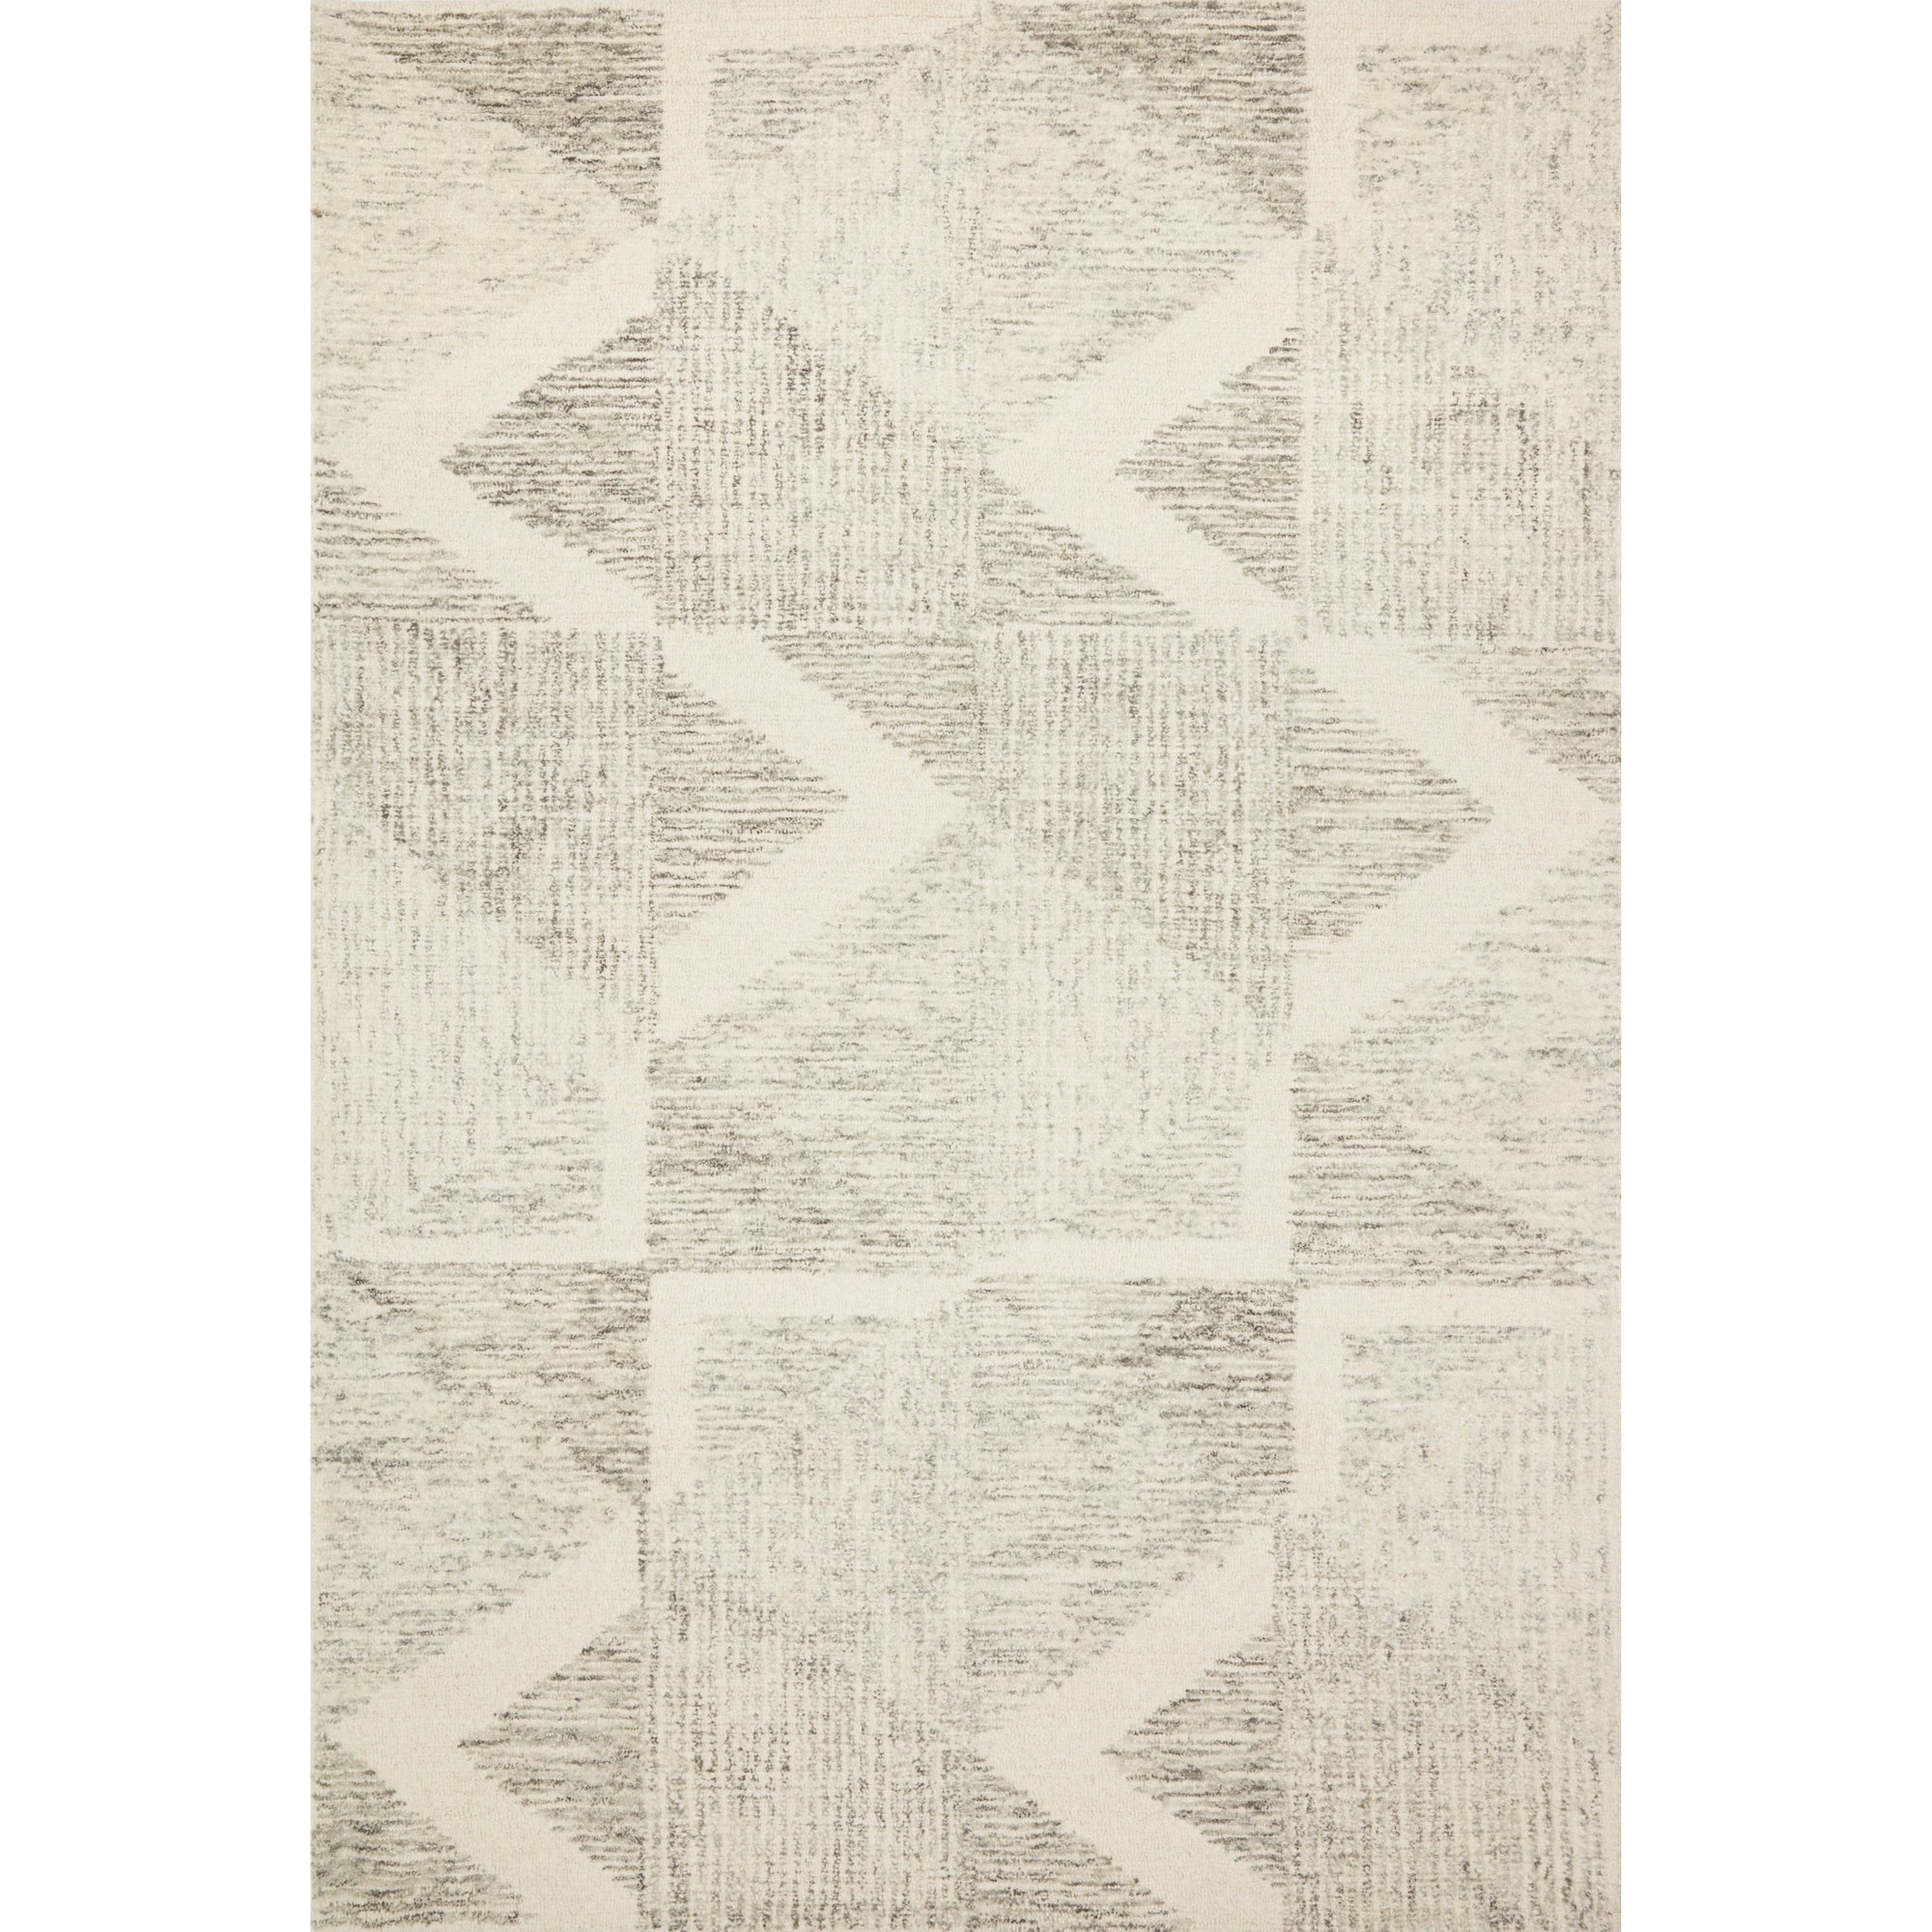 Rugs by Roo Loloi Milo Lt Grey Granite Area Rug in size 18" x 18" Sample